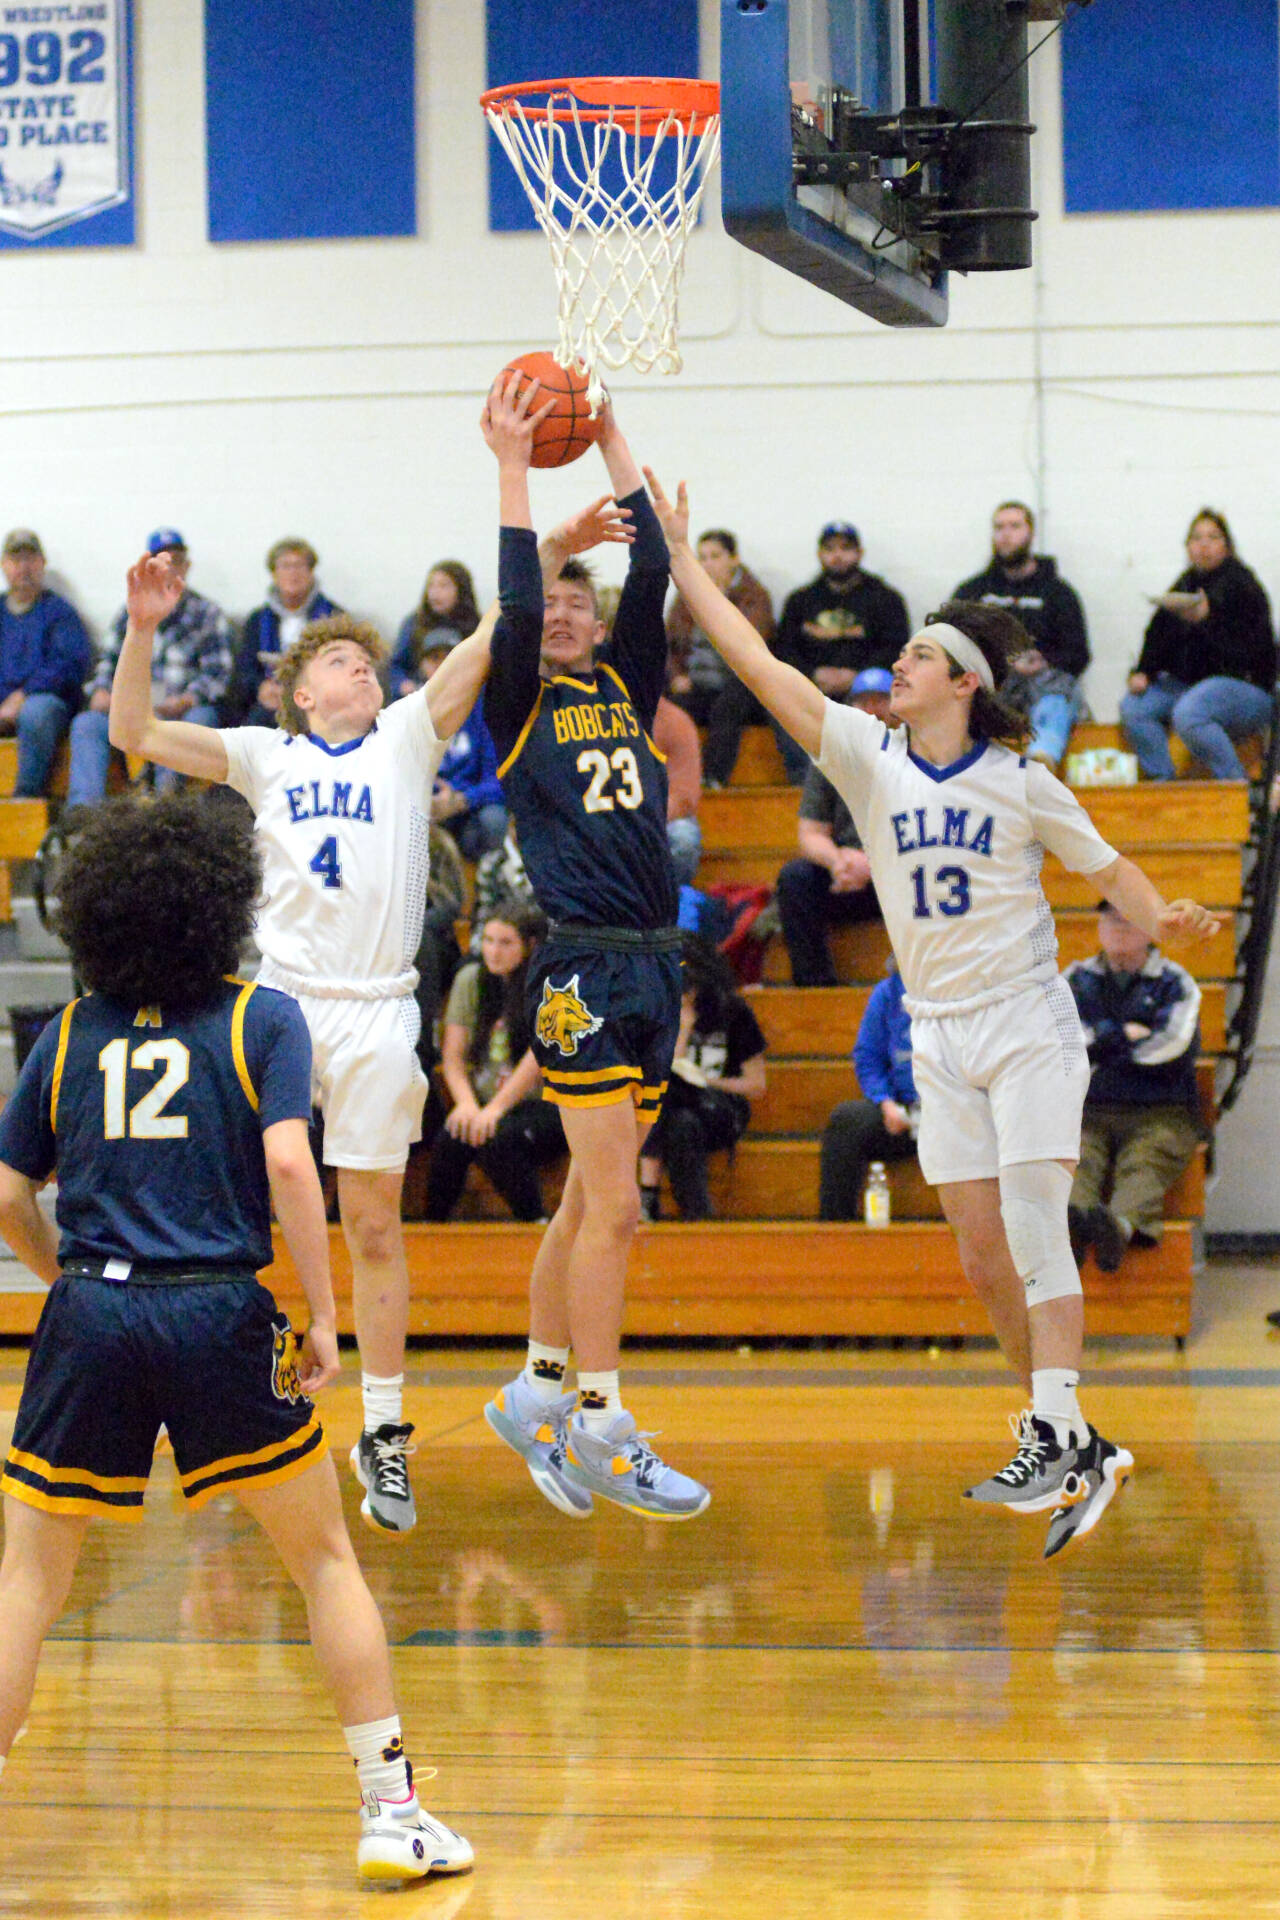 RYAN SPARKS | THE DAILY WORLD Aberdeen’s Baylor Ainsworth (23) goes up for a shot while defended by Elma’s Grant Vessey (4) and Gibson Cain during the Eagles’ 65-38 victory on Tuesday in Elma.